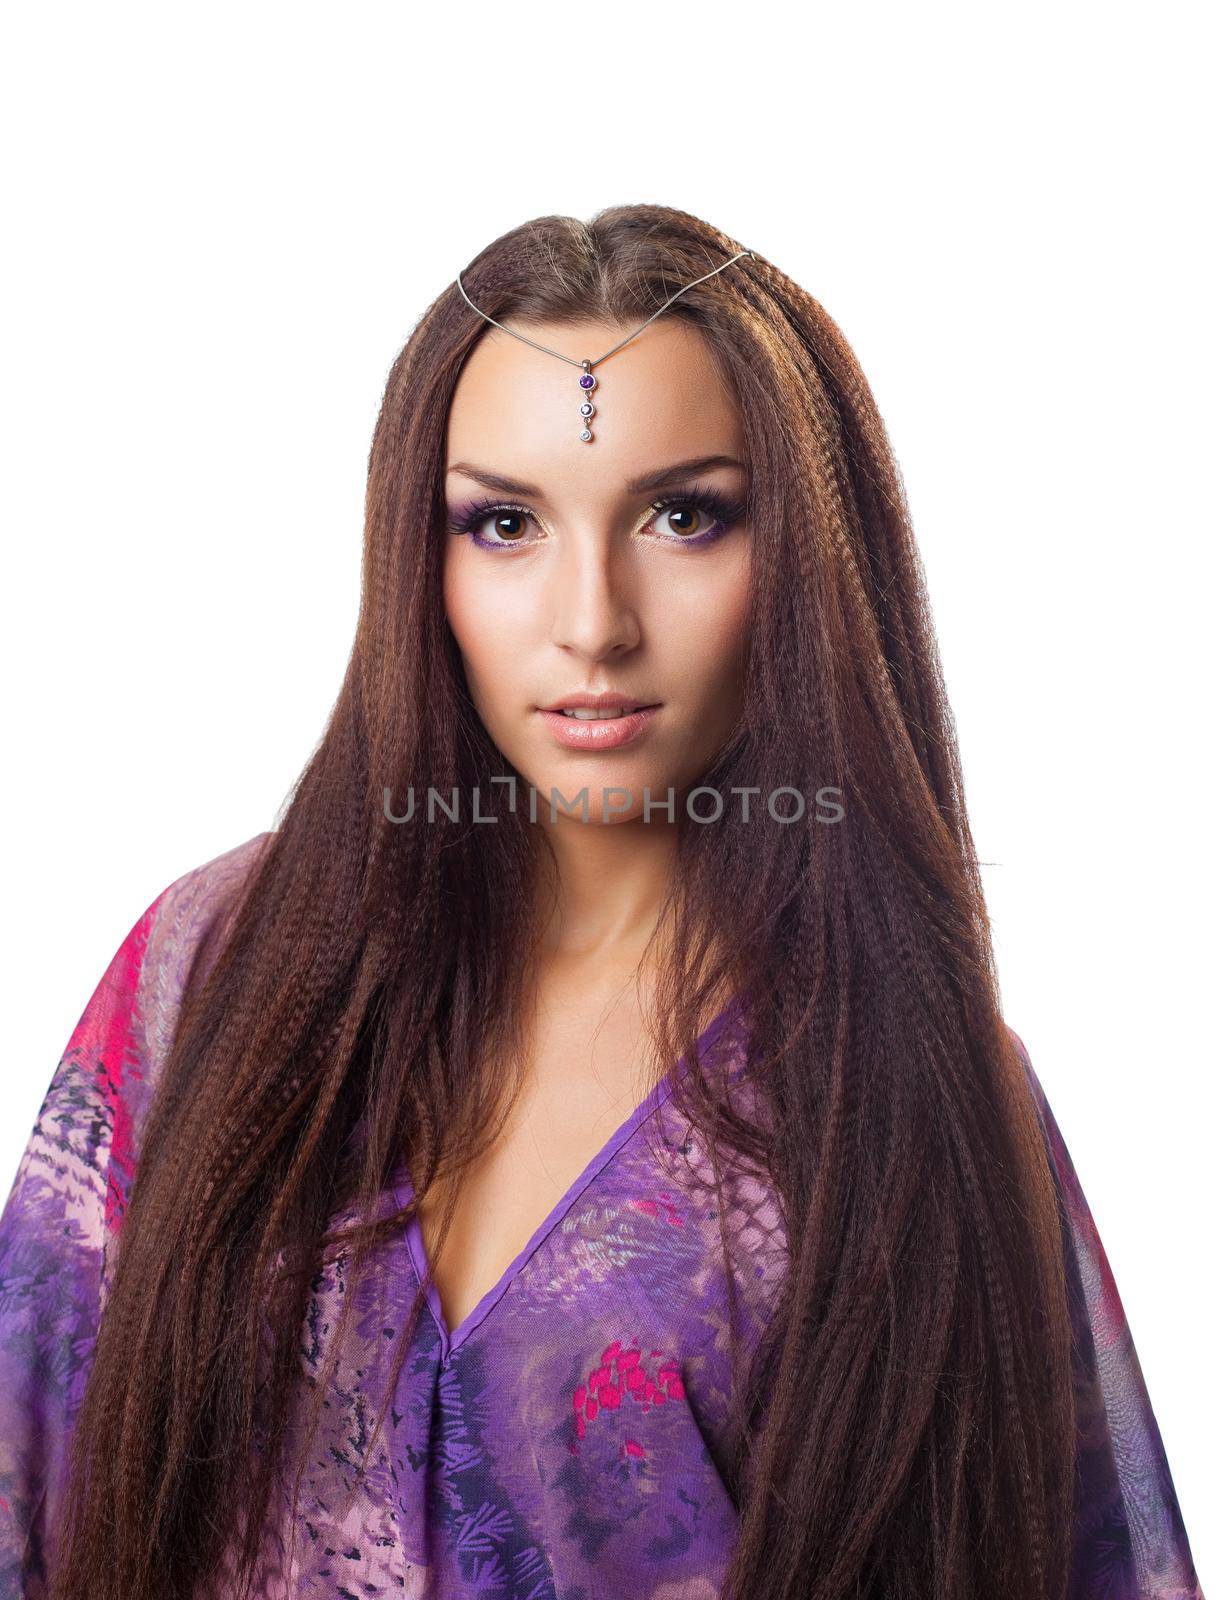 Beautiful young woman portrait with long hairs and jewel on forehead